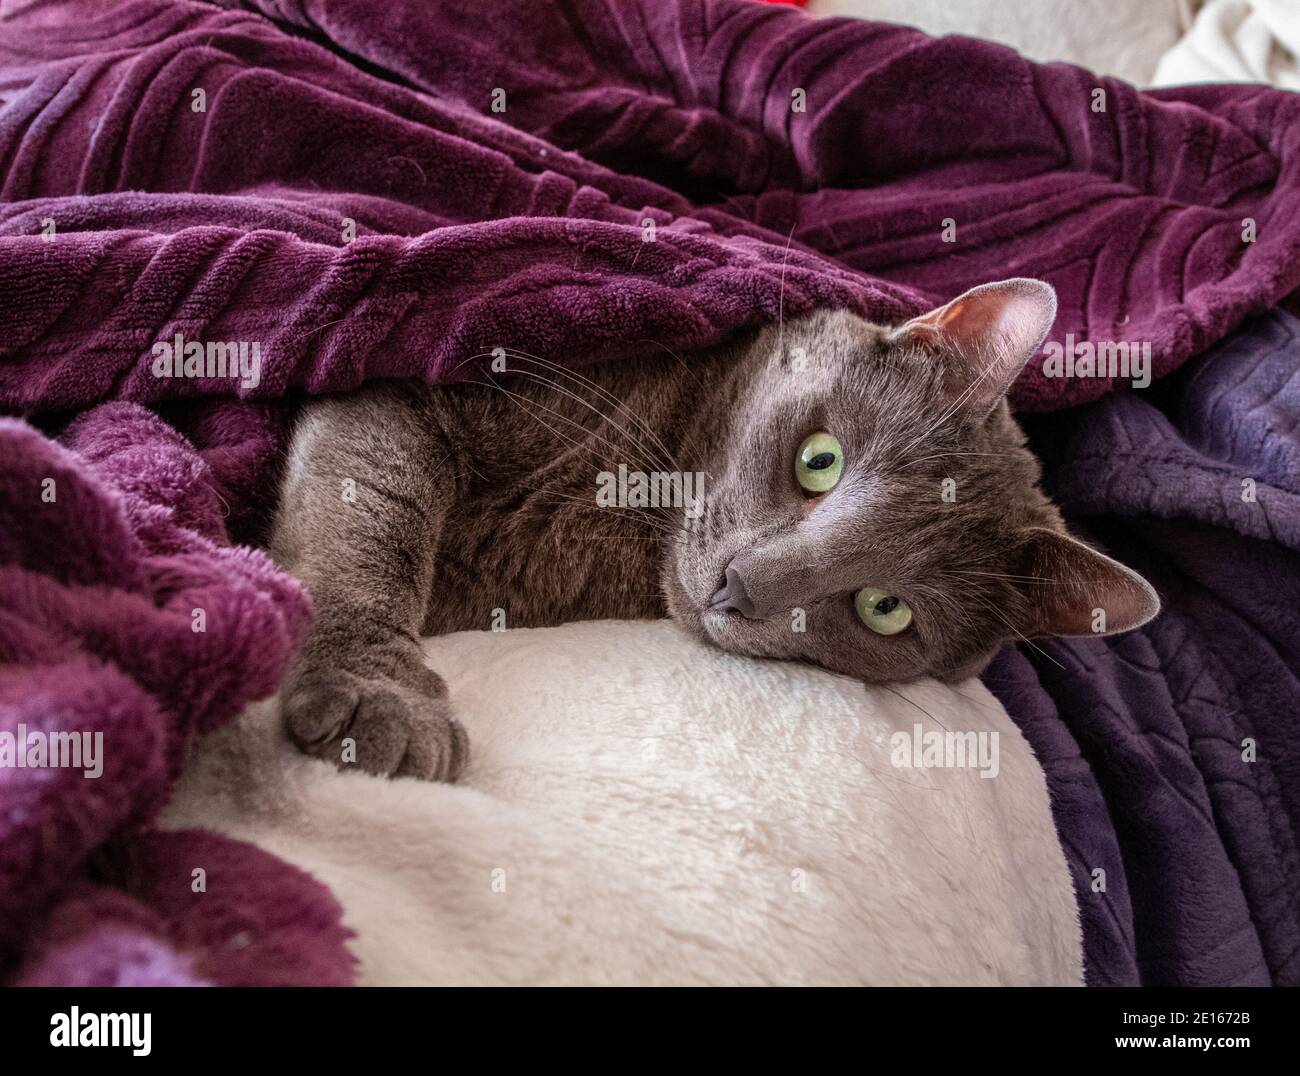 A Russian Blue cat lounging under purple blankets Stock Photo